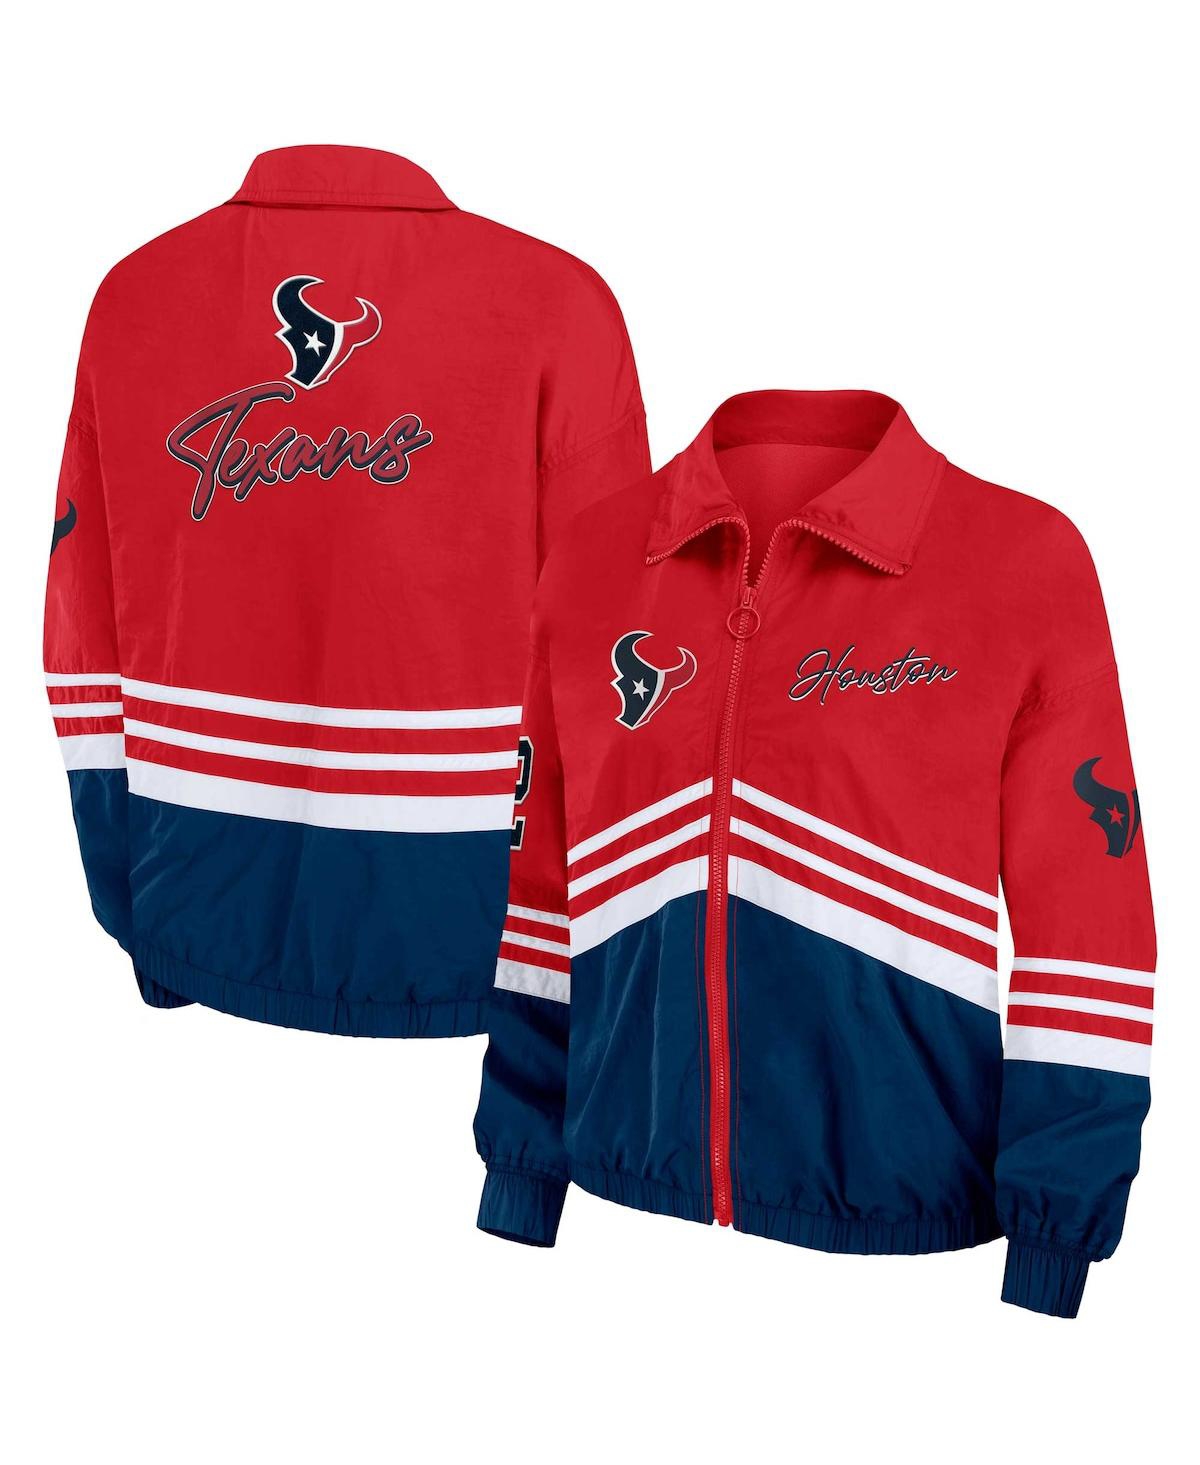 Wear By Erin Andrews Women's Red Distressed Houston Texans Vintage-like ...